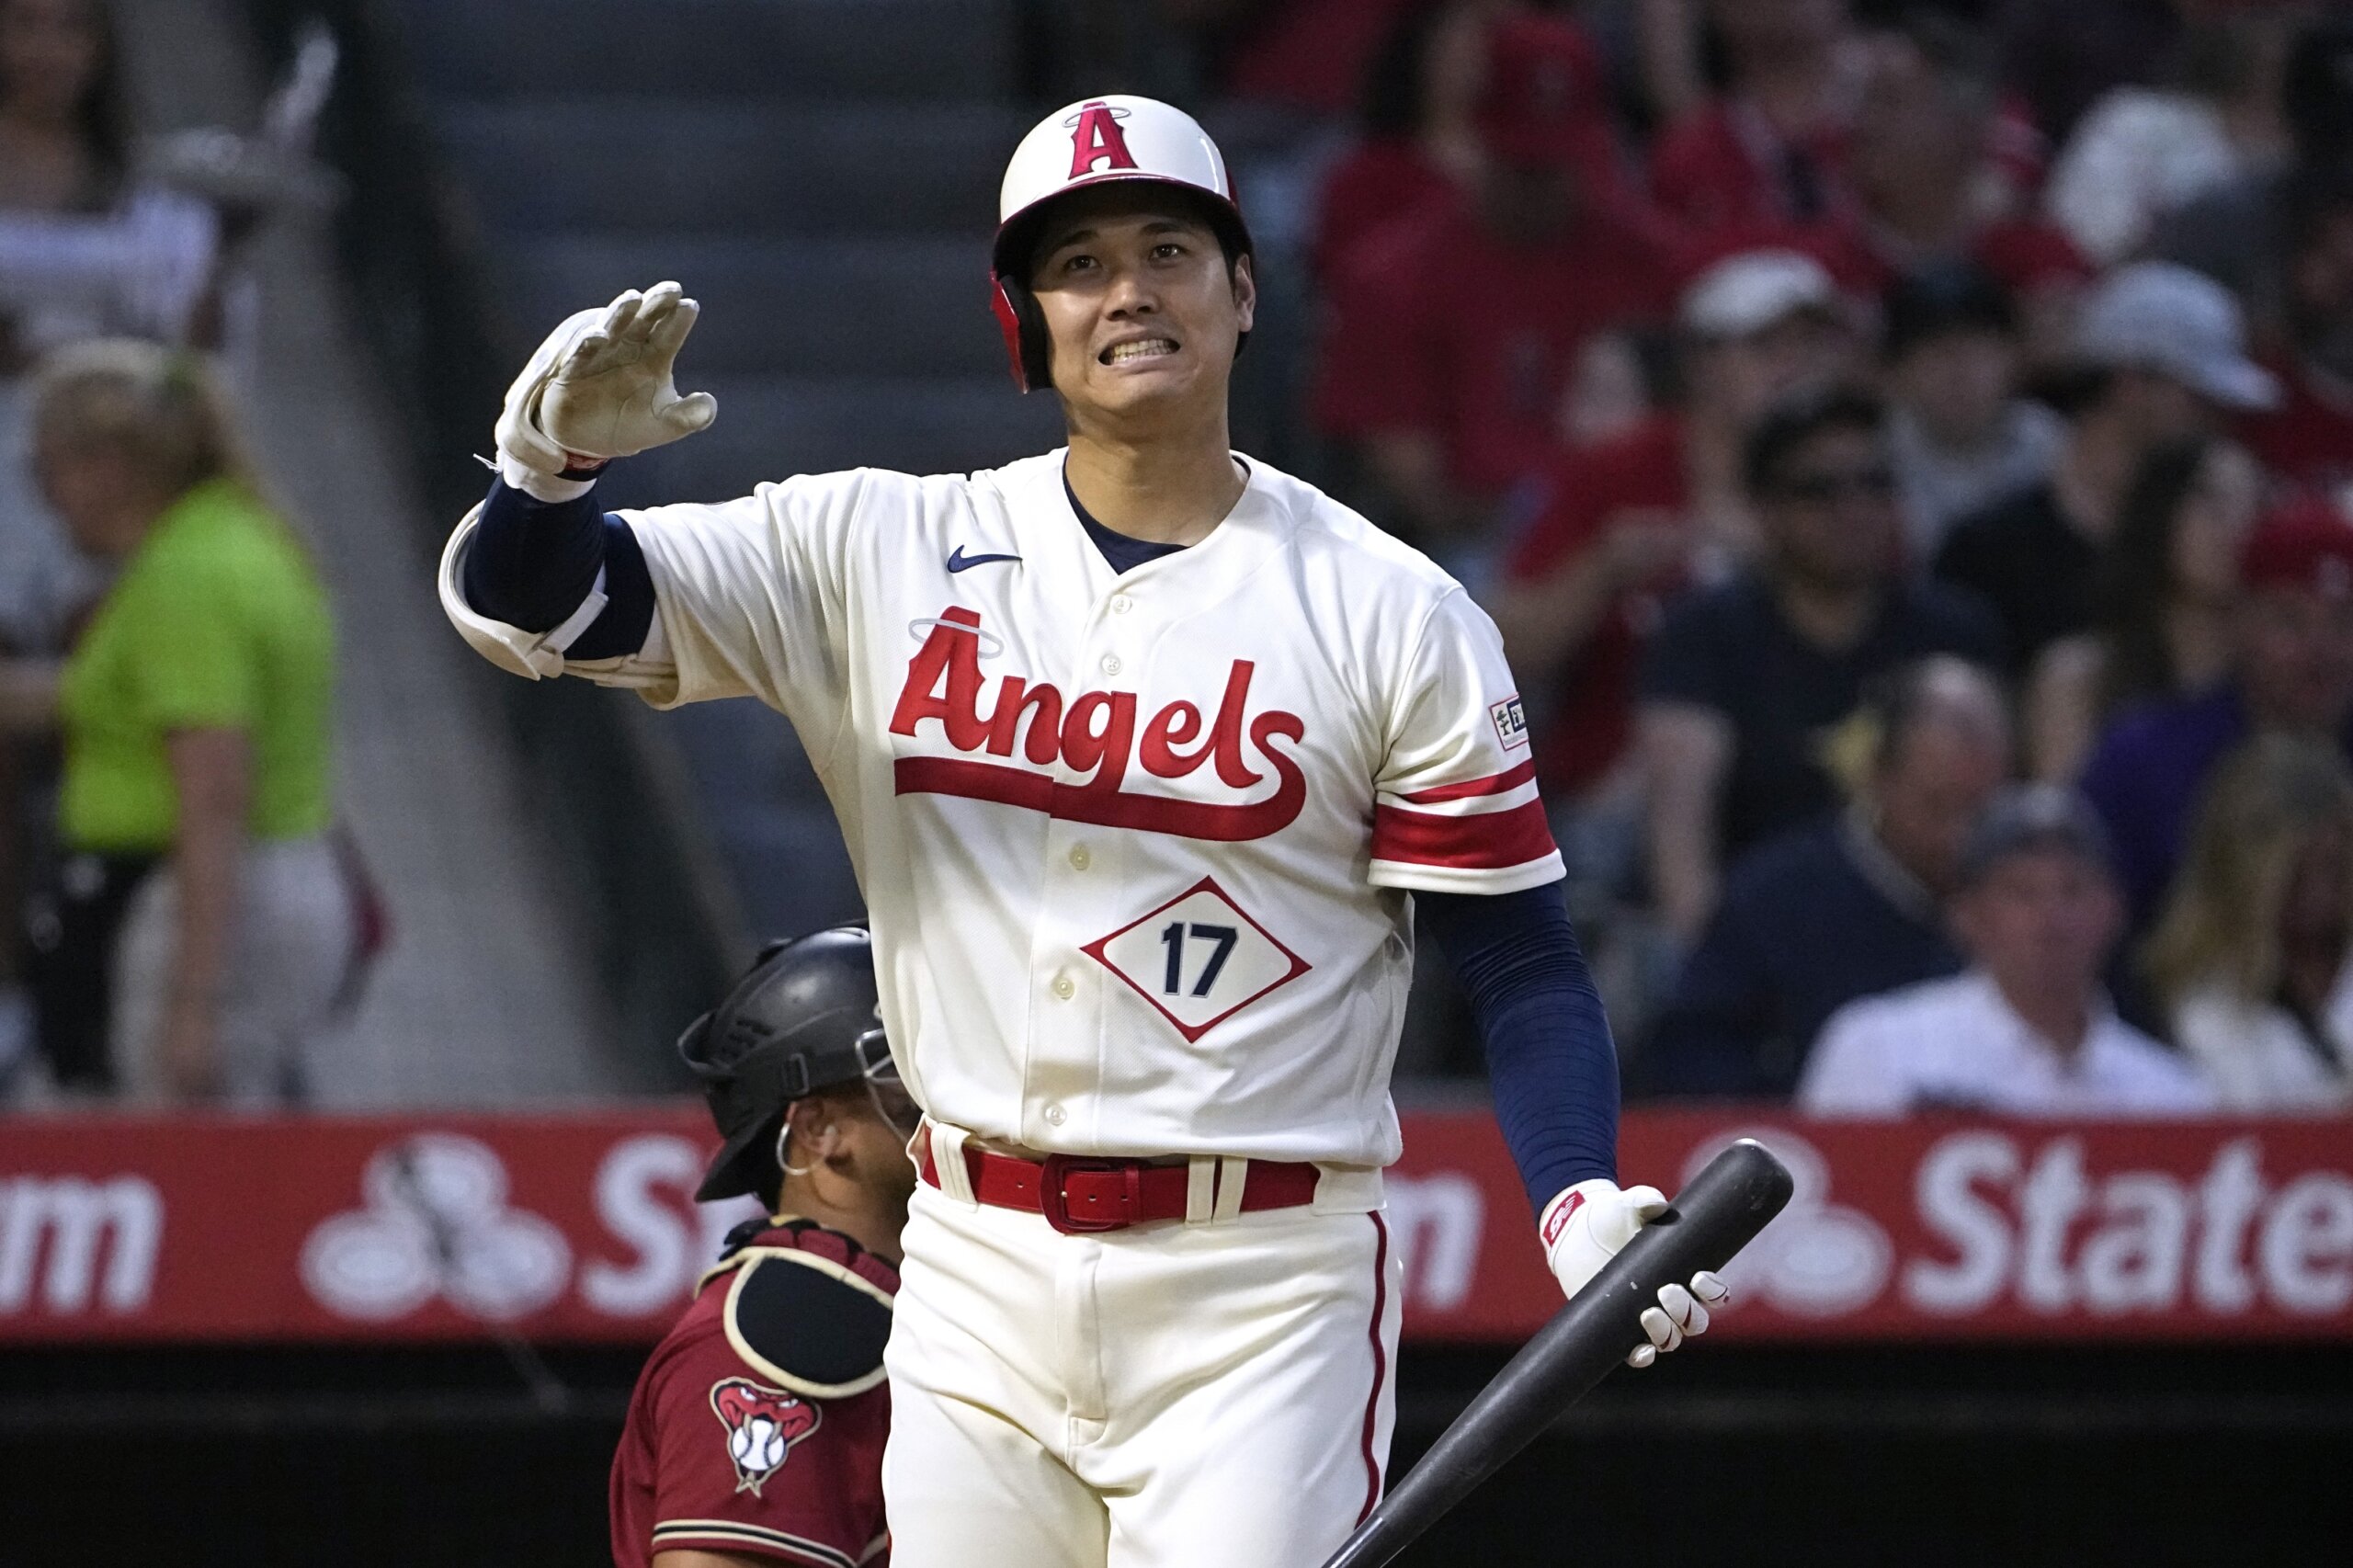 Hey, Shohei Ohtani: The Red Sox are ready for another two-way star, if  you're interested  - The Boston Globe